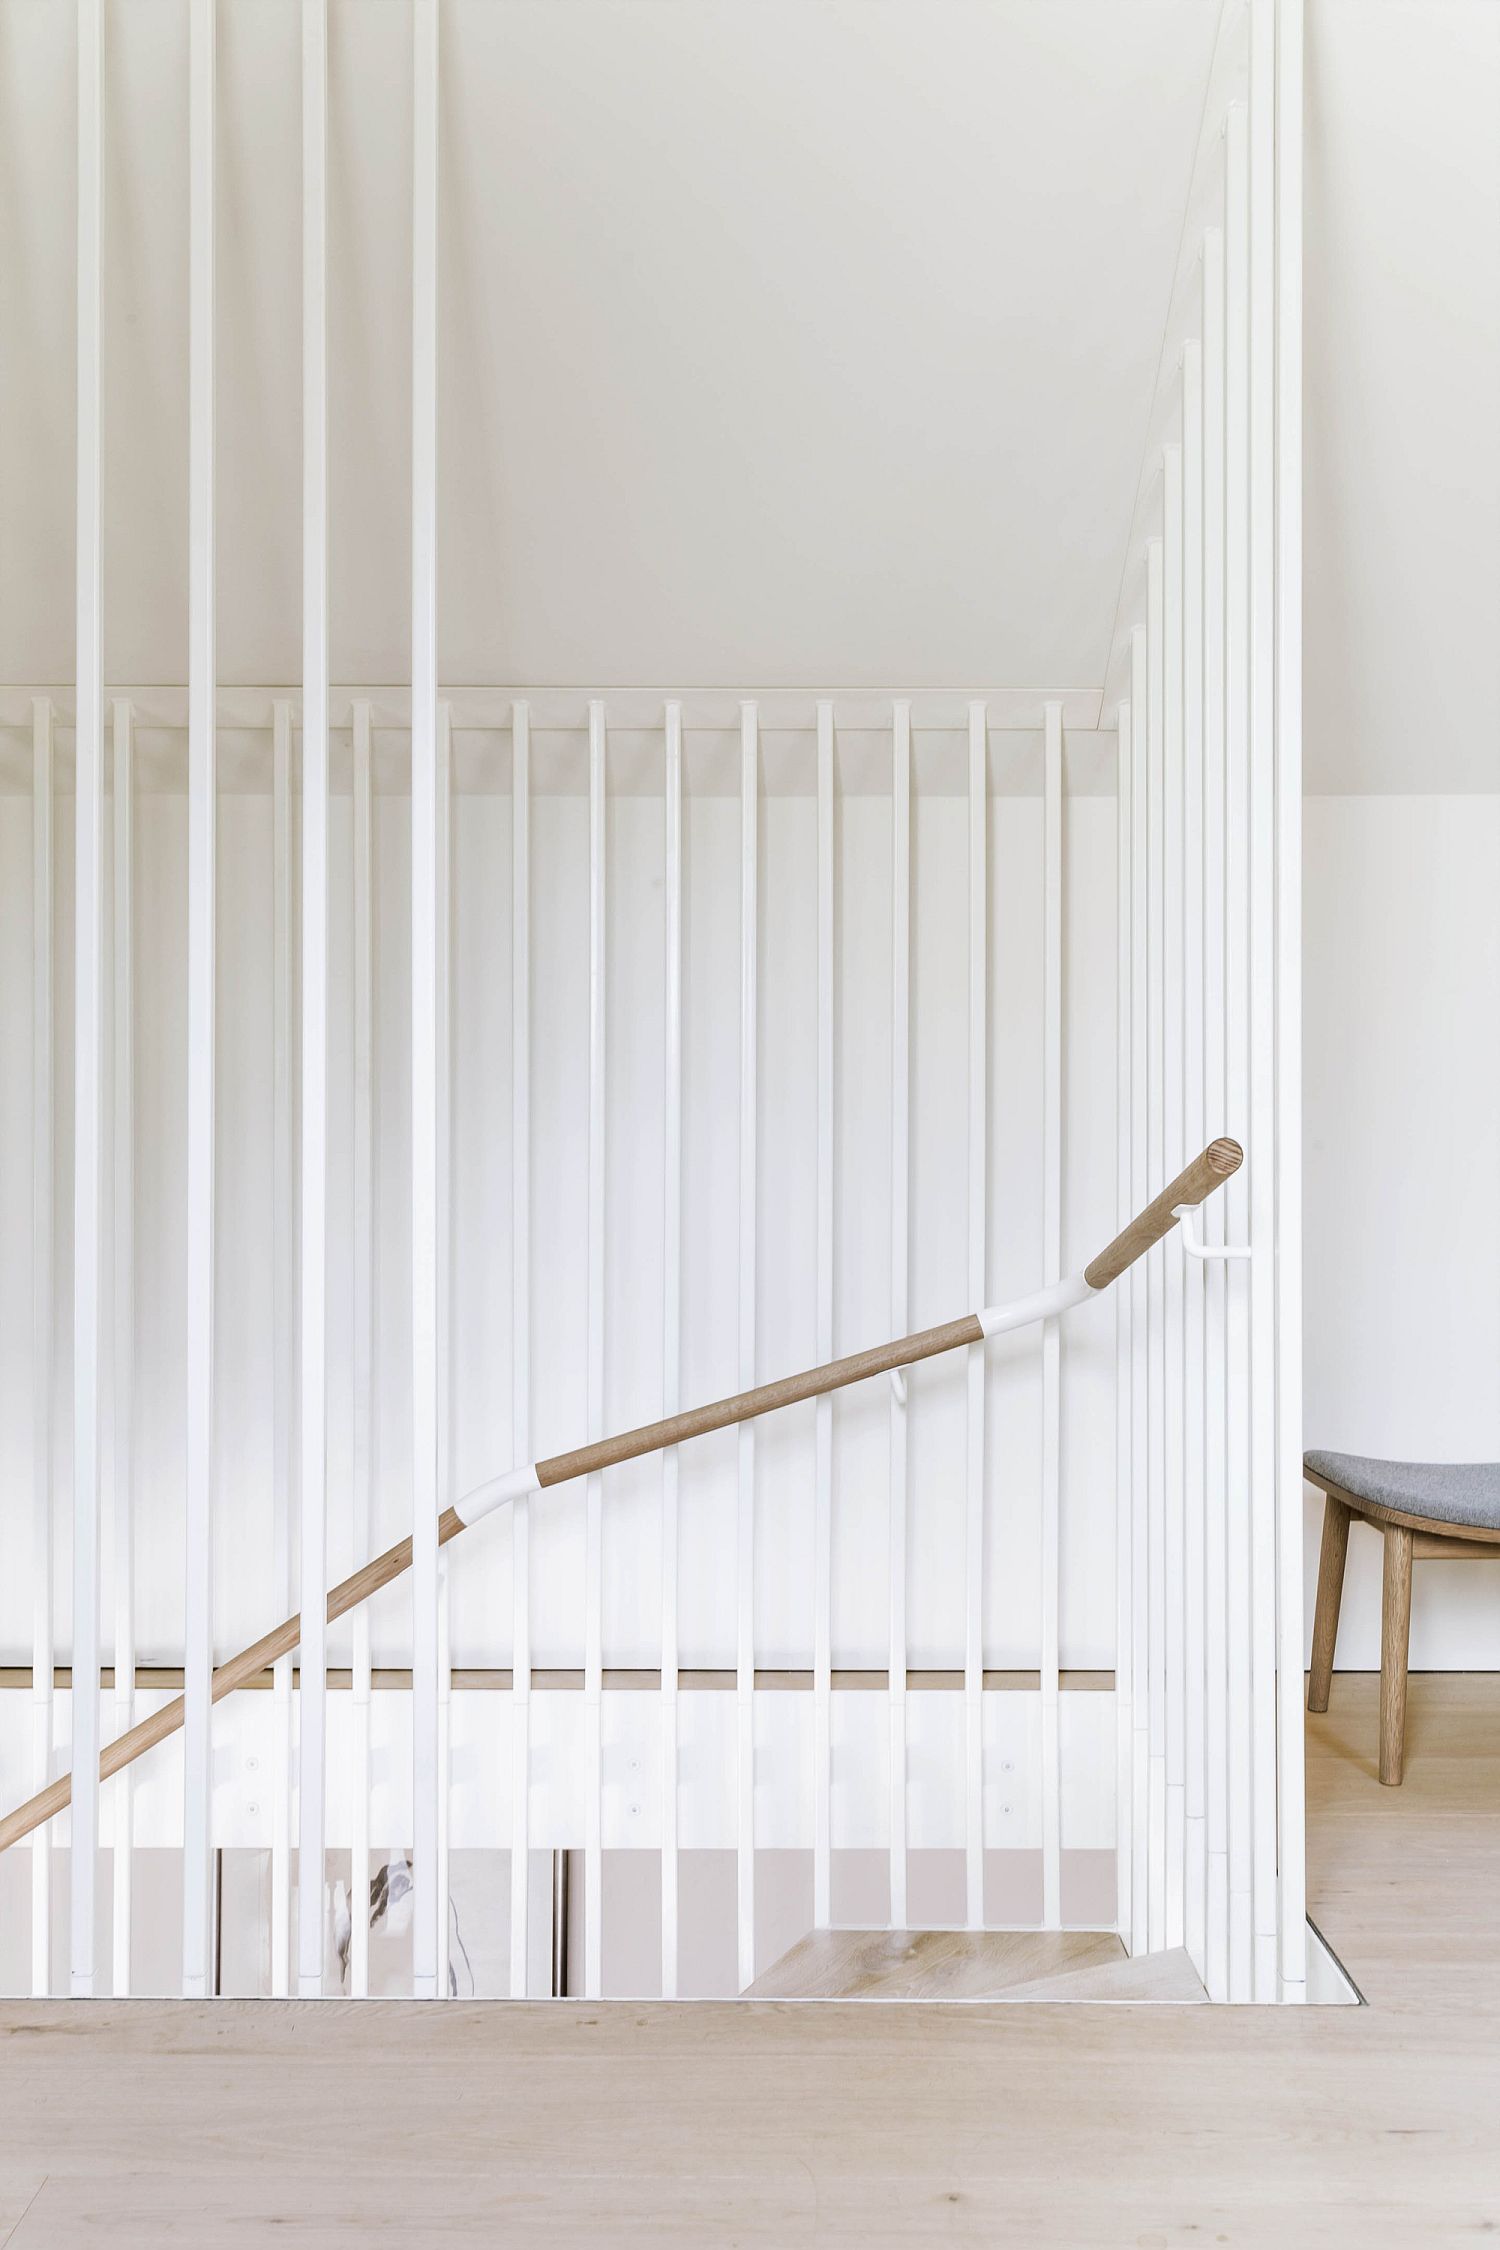 It-is-the-stairway-that-becomes-the-focal-point-of-the-new-interior